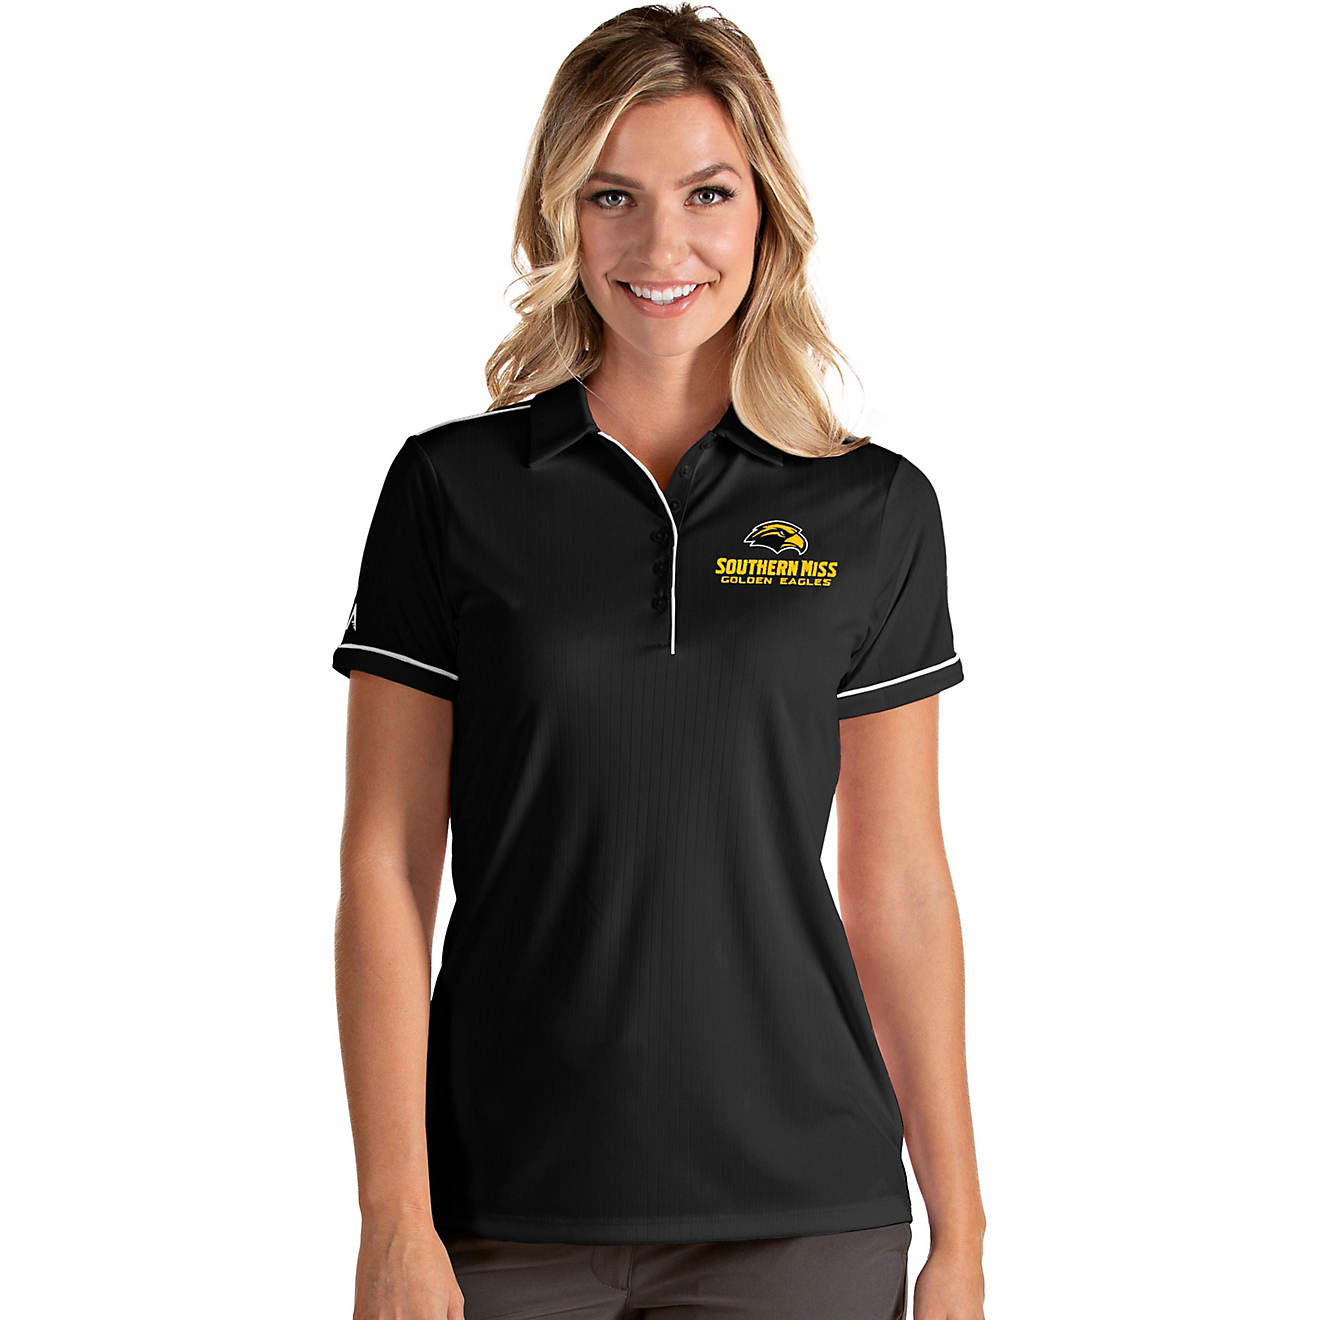 Antigua Women's University of Southern Mississippi Salute Polo Shirt                                                             - view number 1